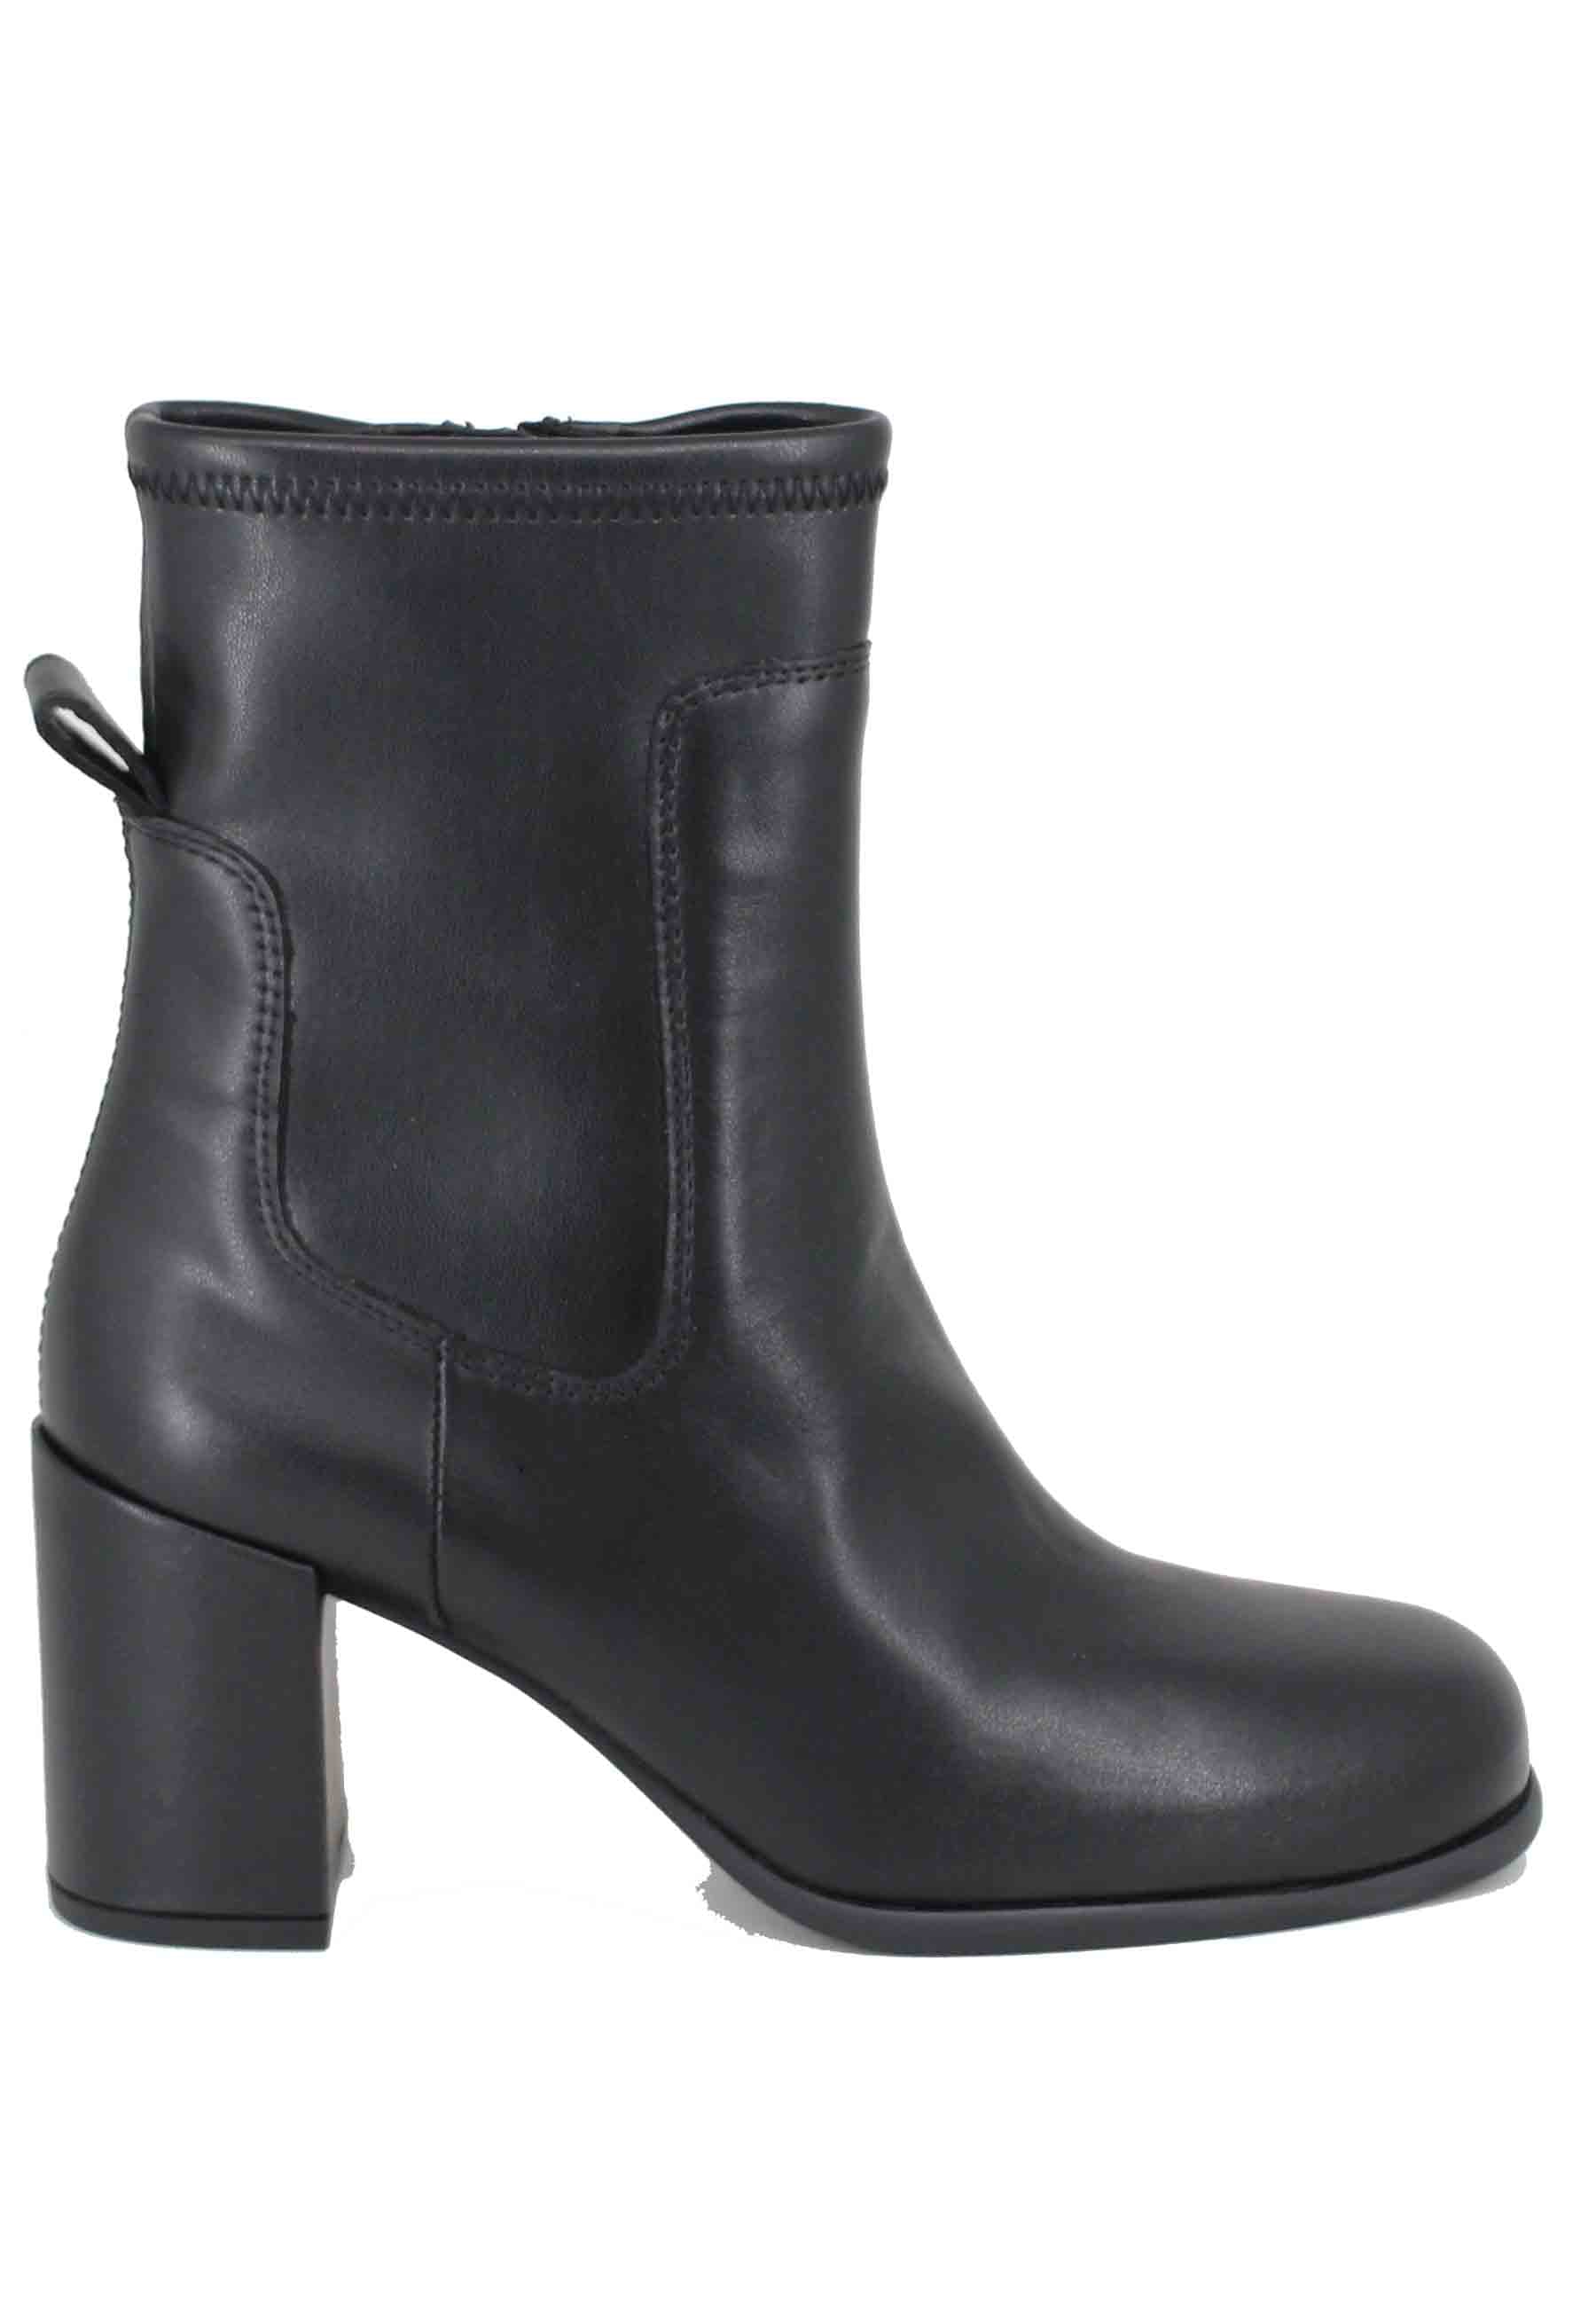 Women's ankle boots in black stretch leather with heel